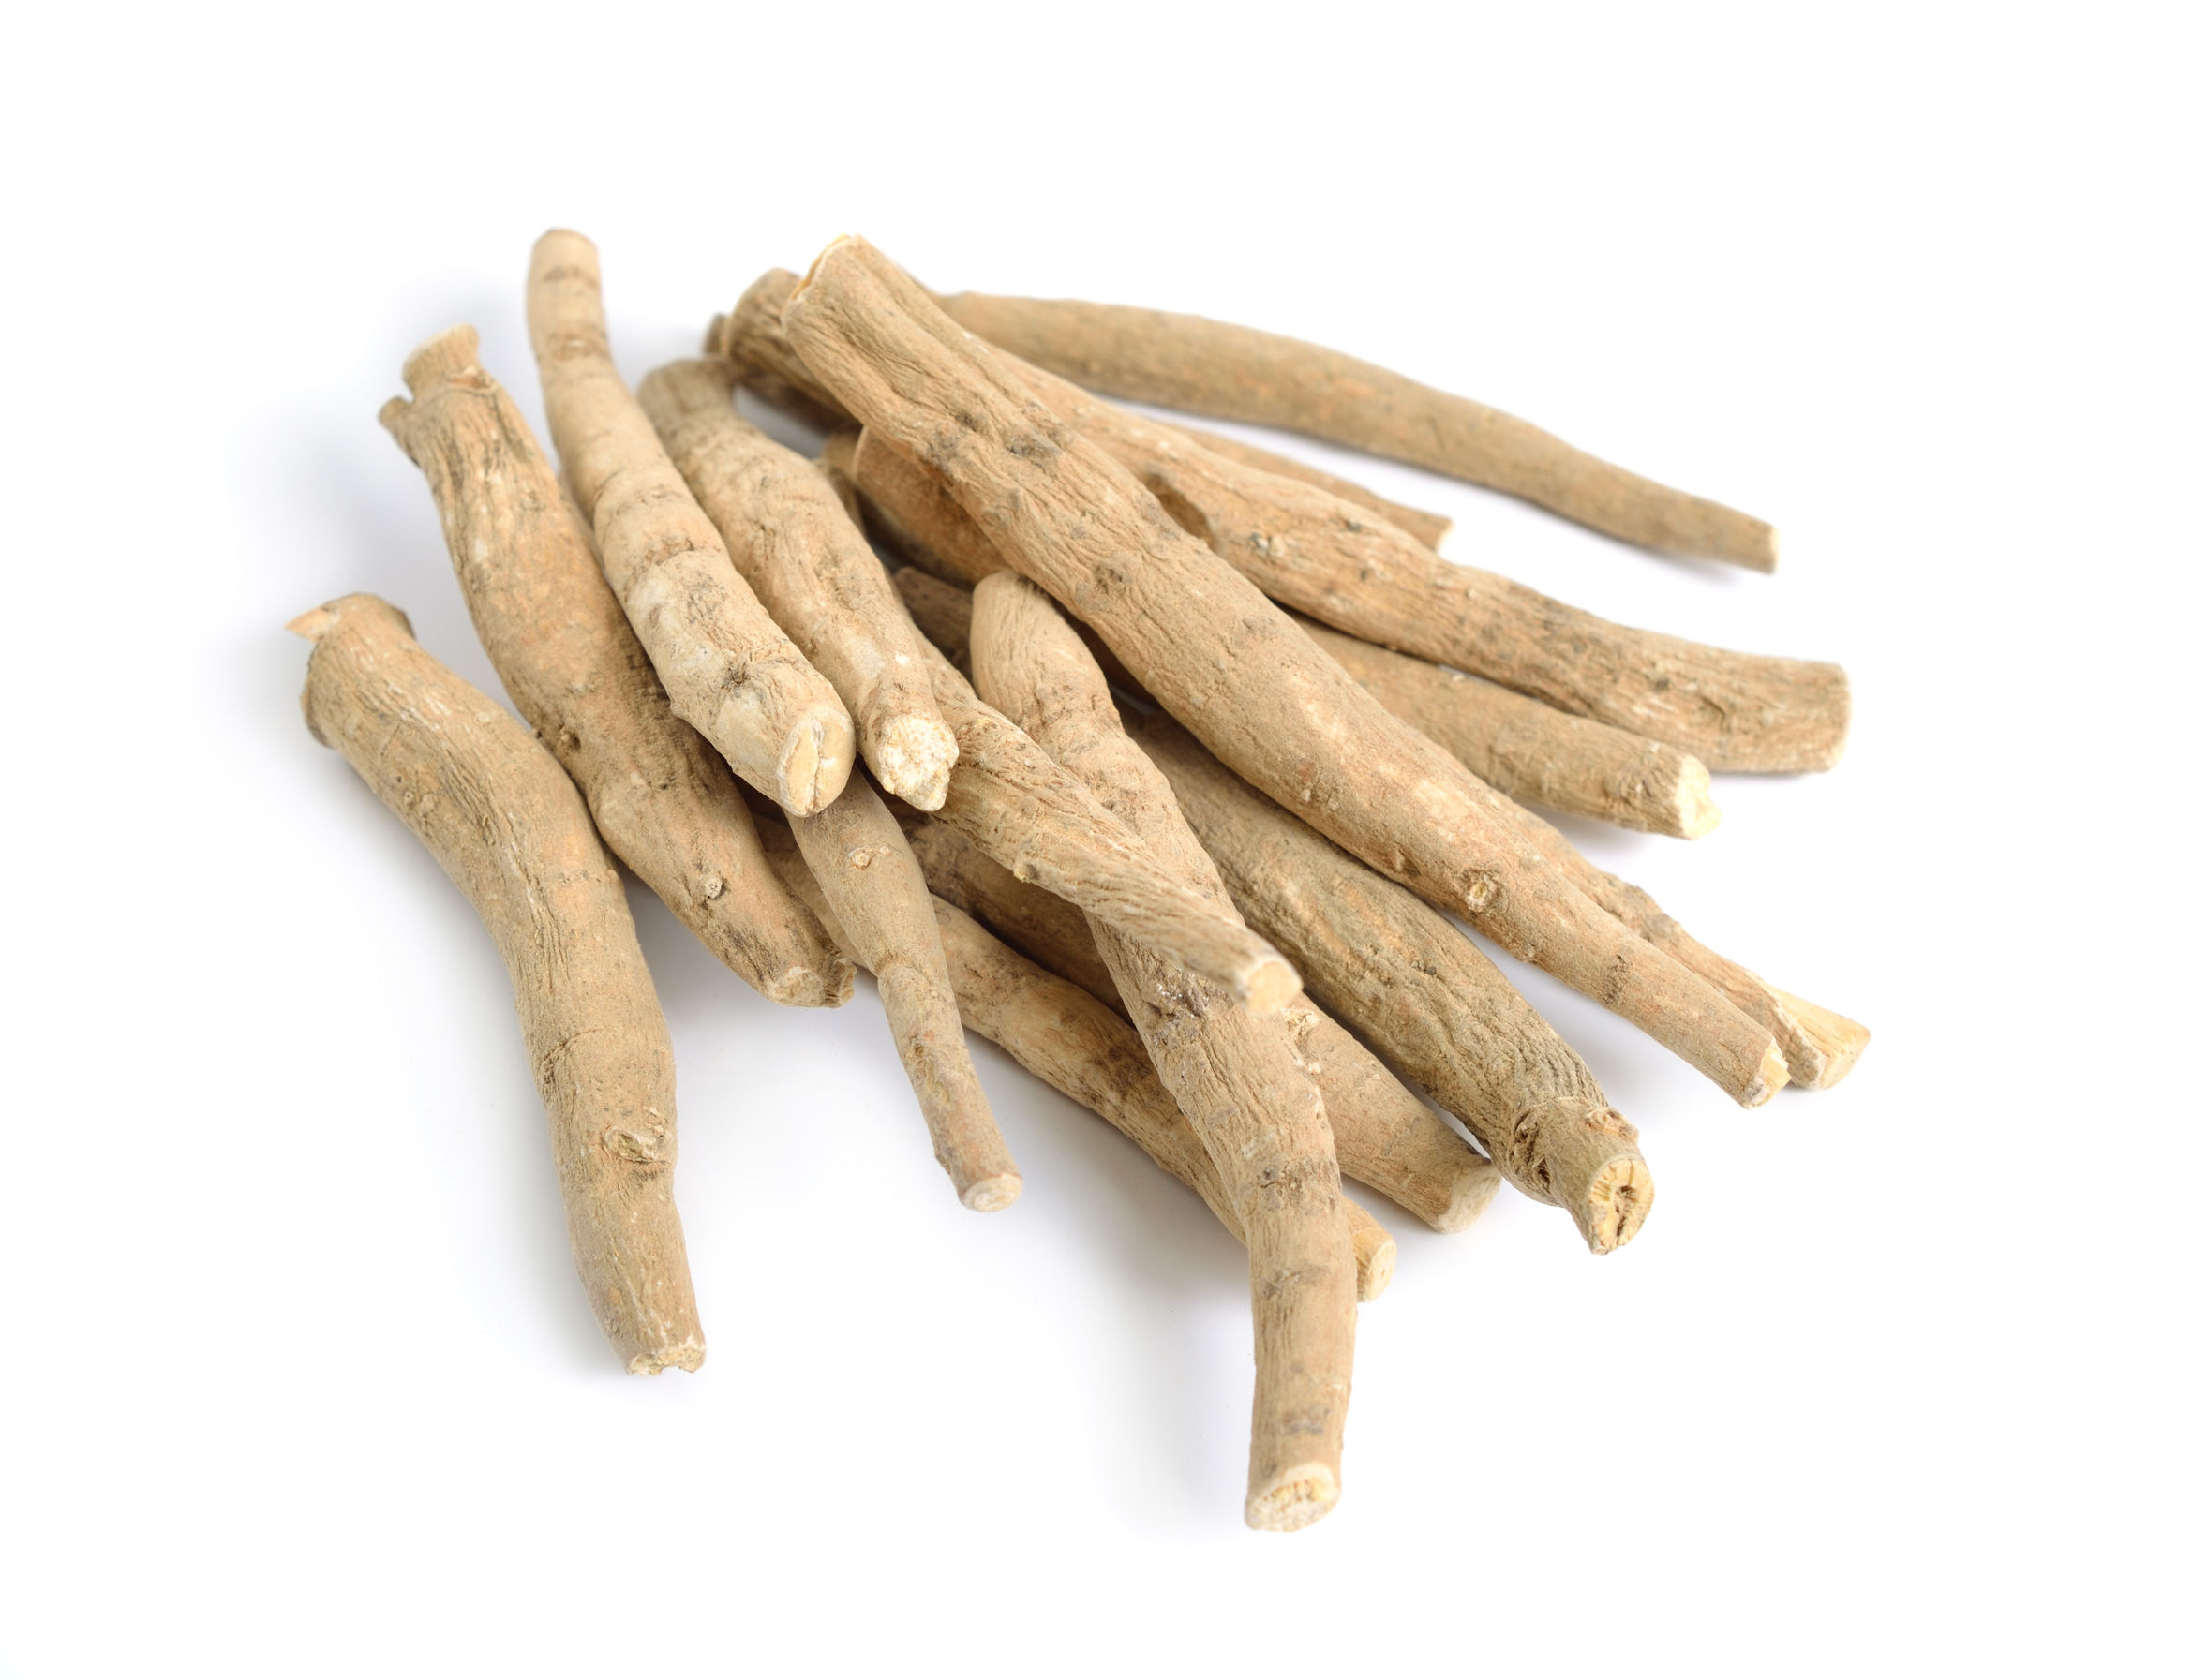 Ashwagandha root used in Kick Ass protein powders.